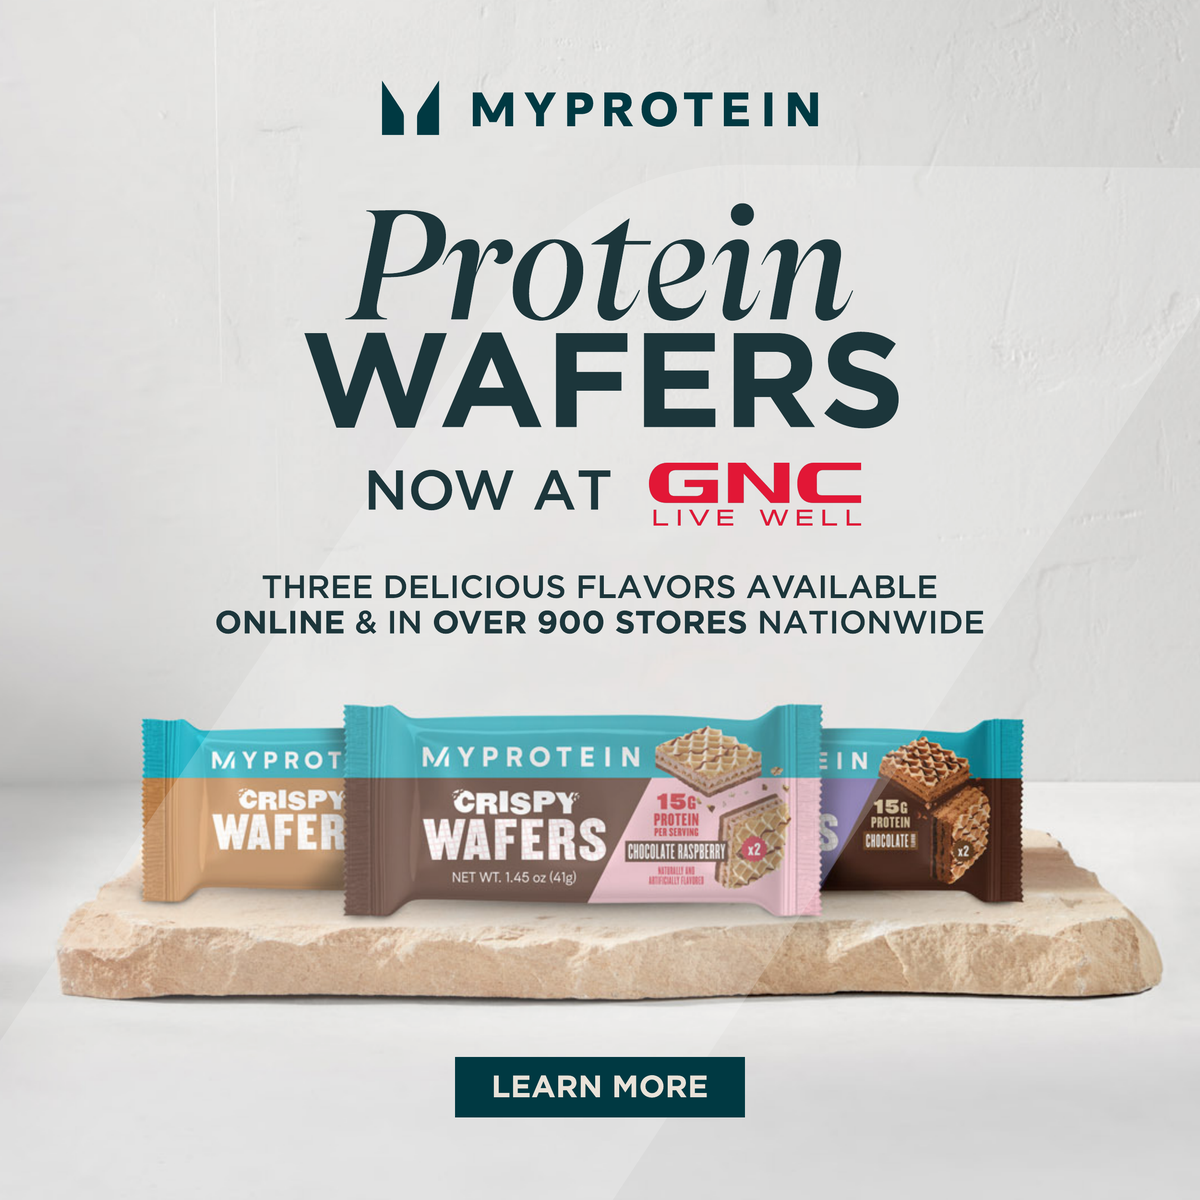 https://us.myprotein.com/thezone/new-products/myprotein-x-gnc-crispy-wafers-now-available-in-stores-online/